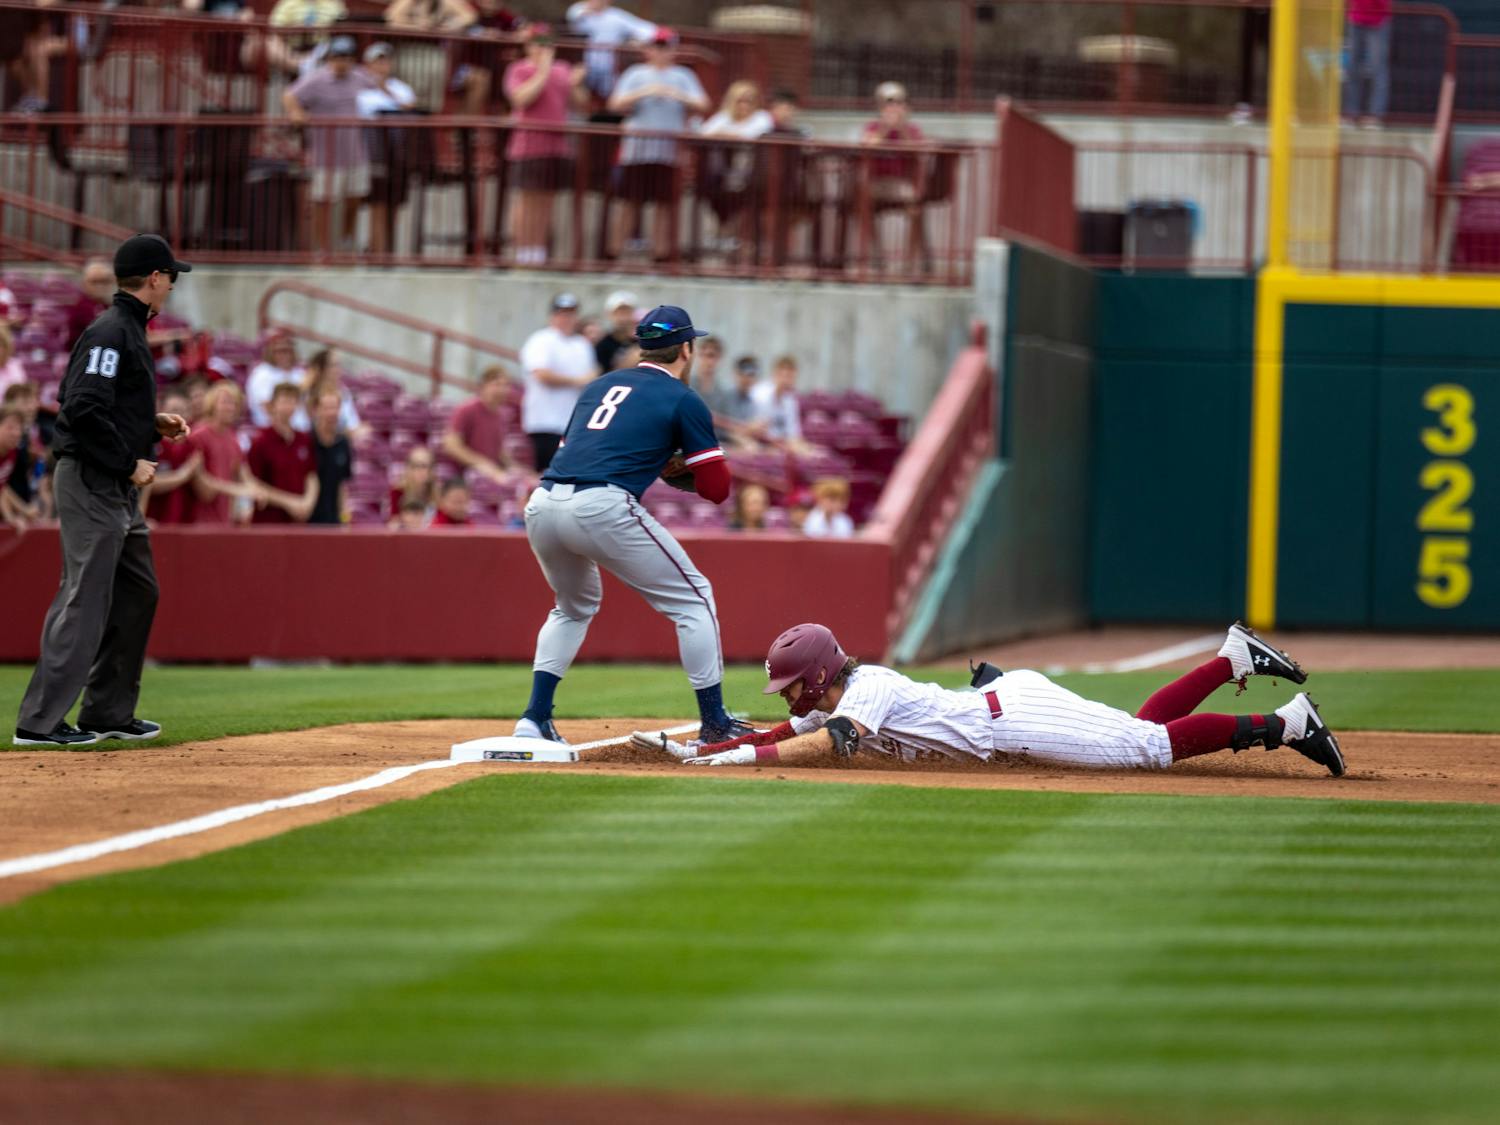 Fifth-year infield Will McGillis slides onto third base and is safe during the South Carolina matchup against UPenn at Founders Park on Feb. 24, 2023. The Gamecocks won the first game in the series 7-4.